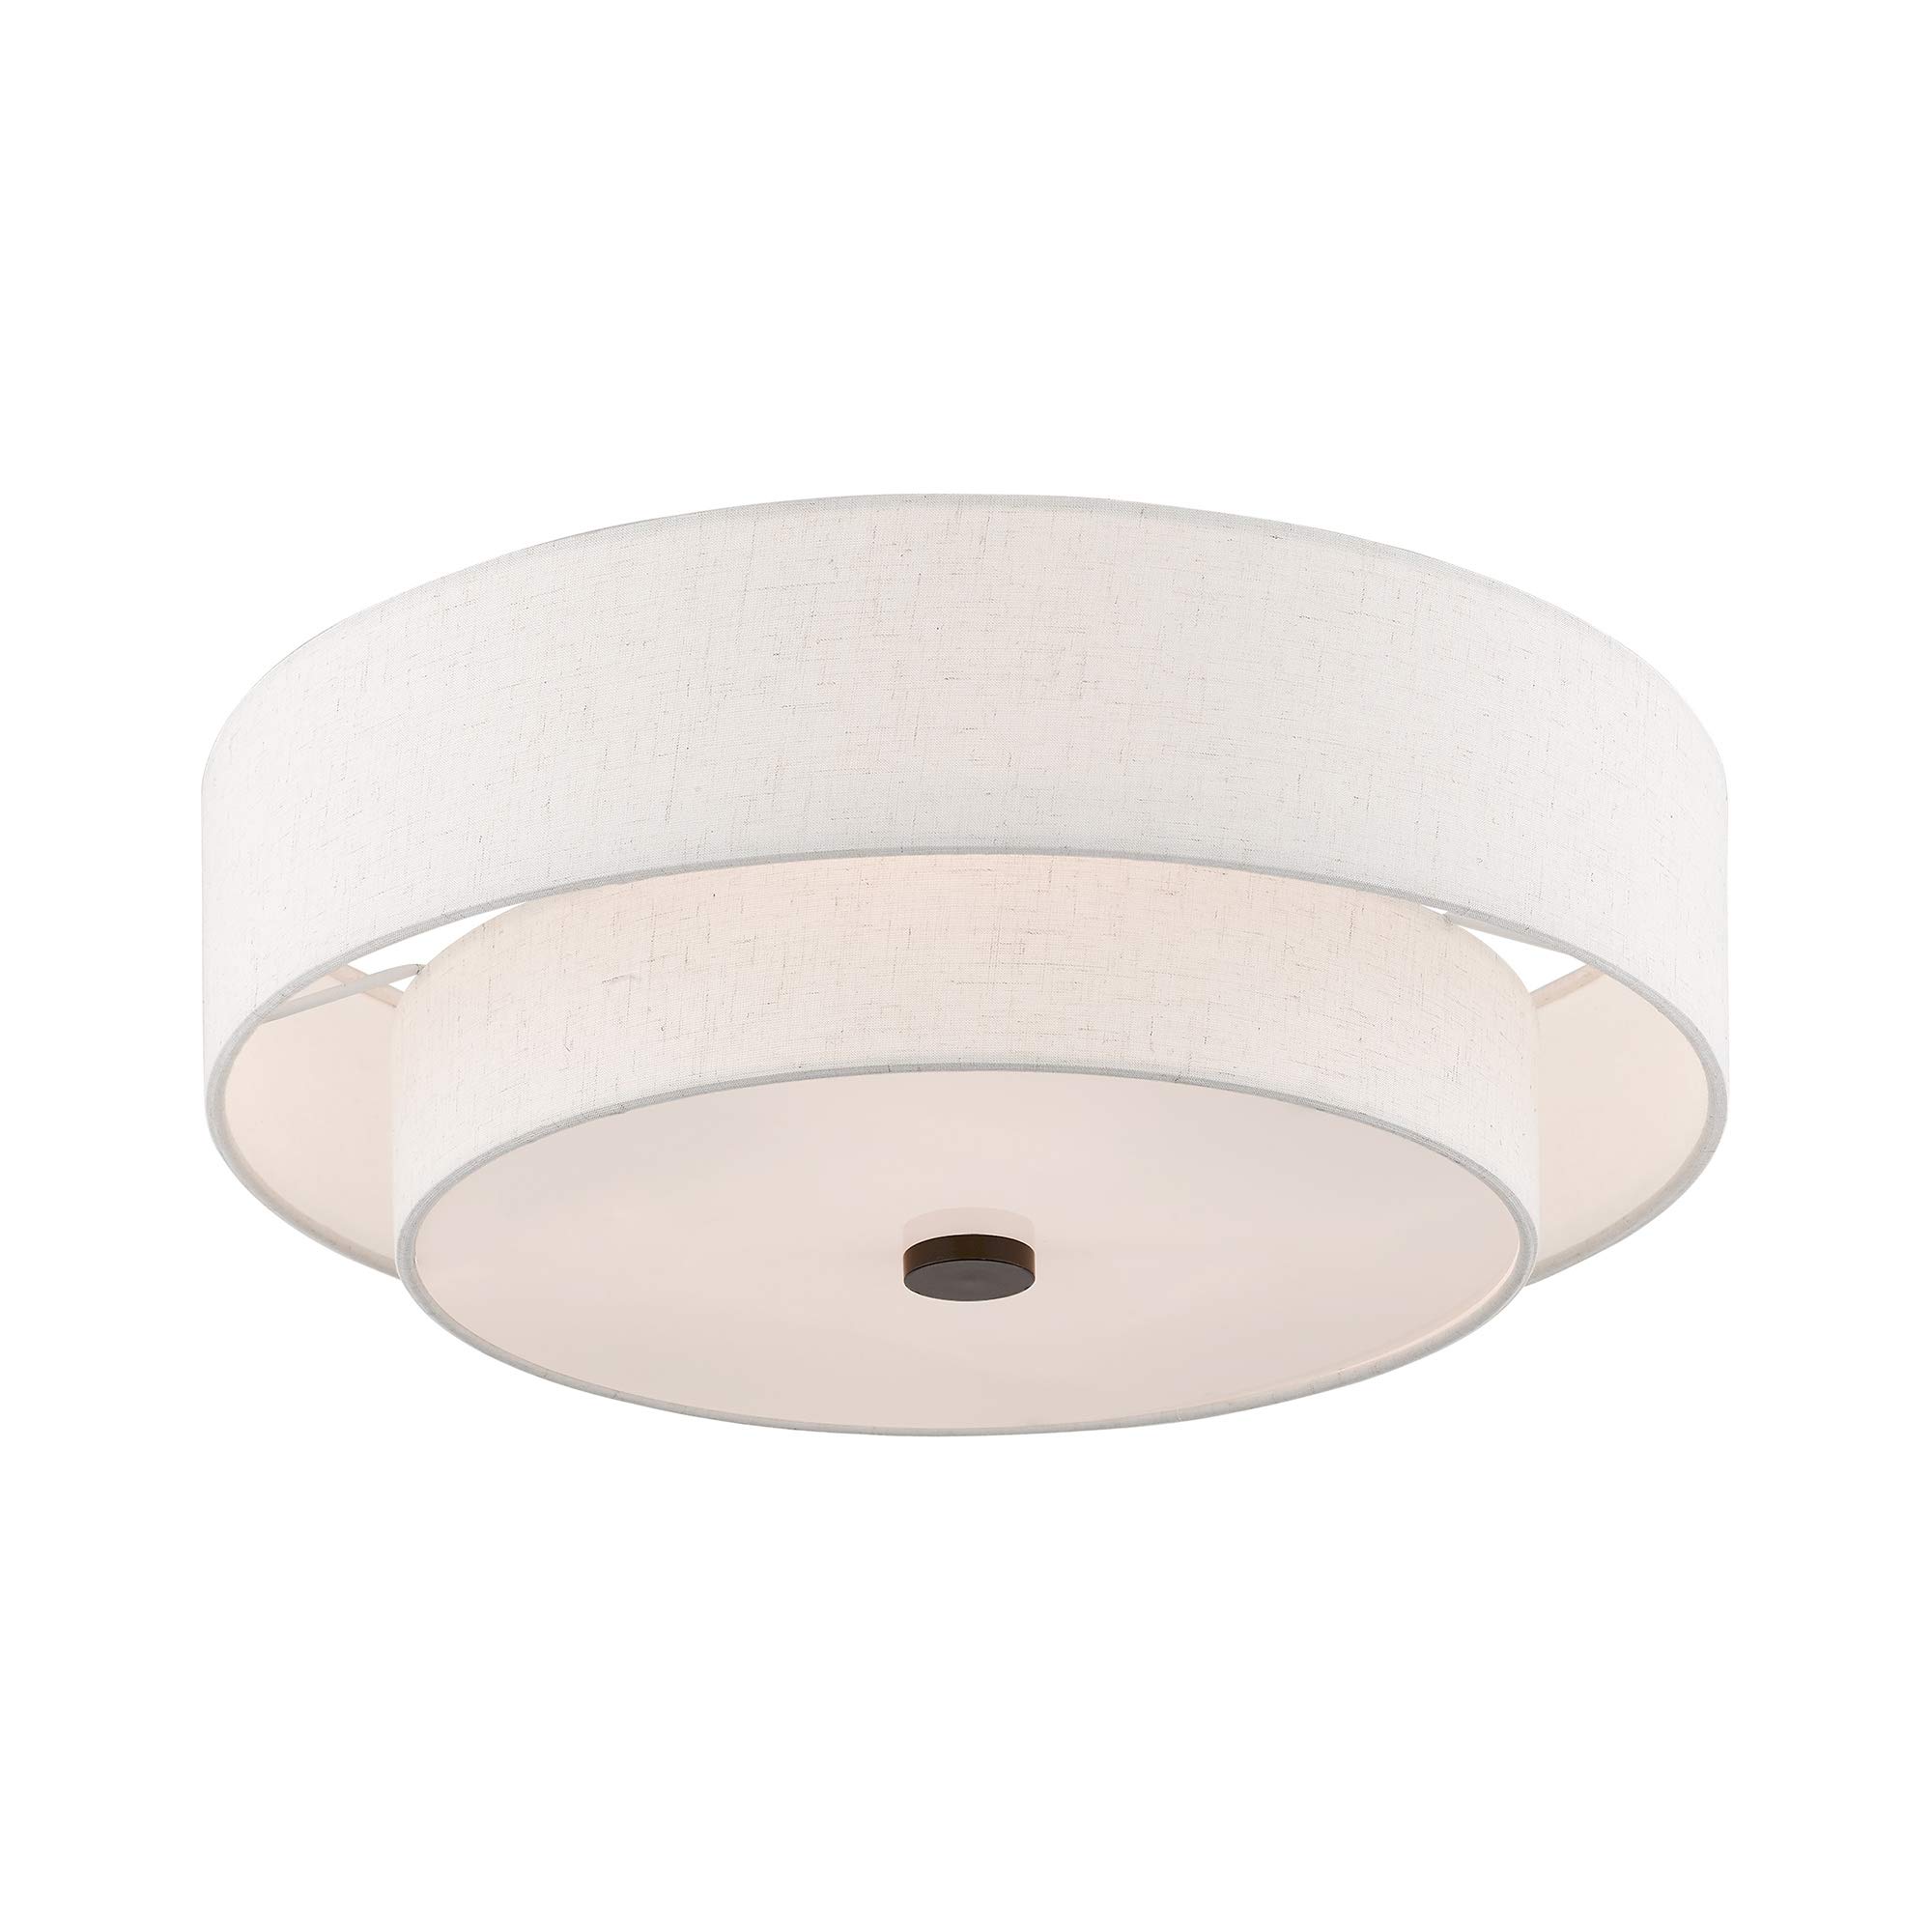 Livex Lighting 51085-92 4-Light Semi Flush Mount Ceiling Fixture with Oatmeal Color Fabric Hardback Drum Shade and Satin White Diffuser, English Bronze